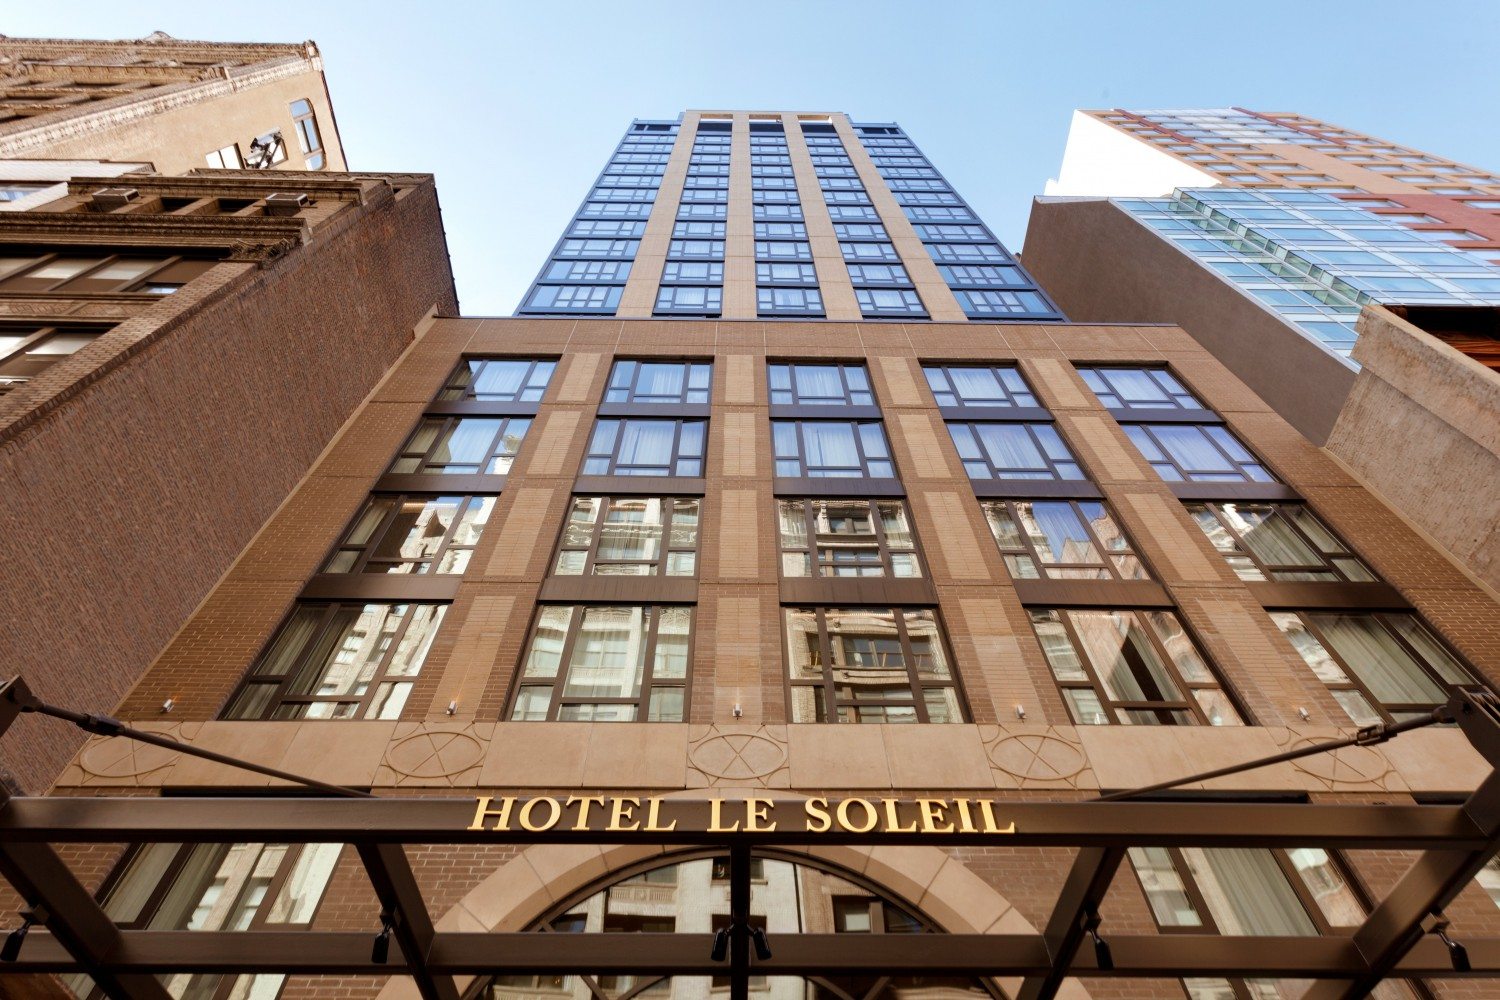 Executive Hotel le Soleil New York’s Lowell Beebe-Center talks about a great new Manhattan hotel, life as a hotel GM